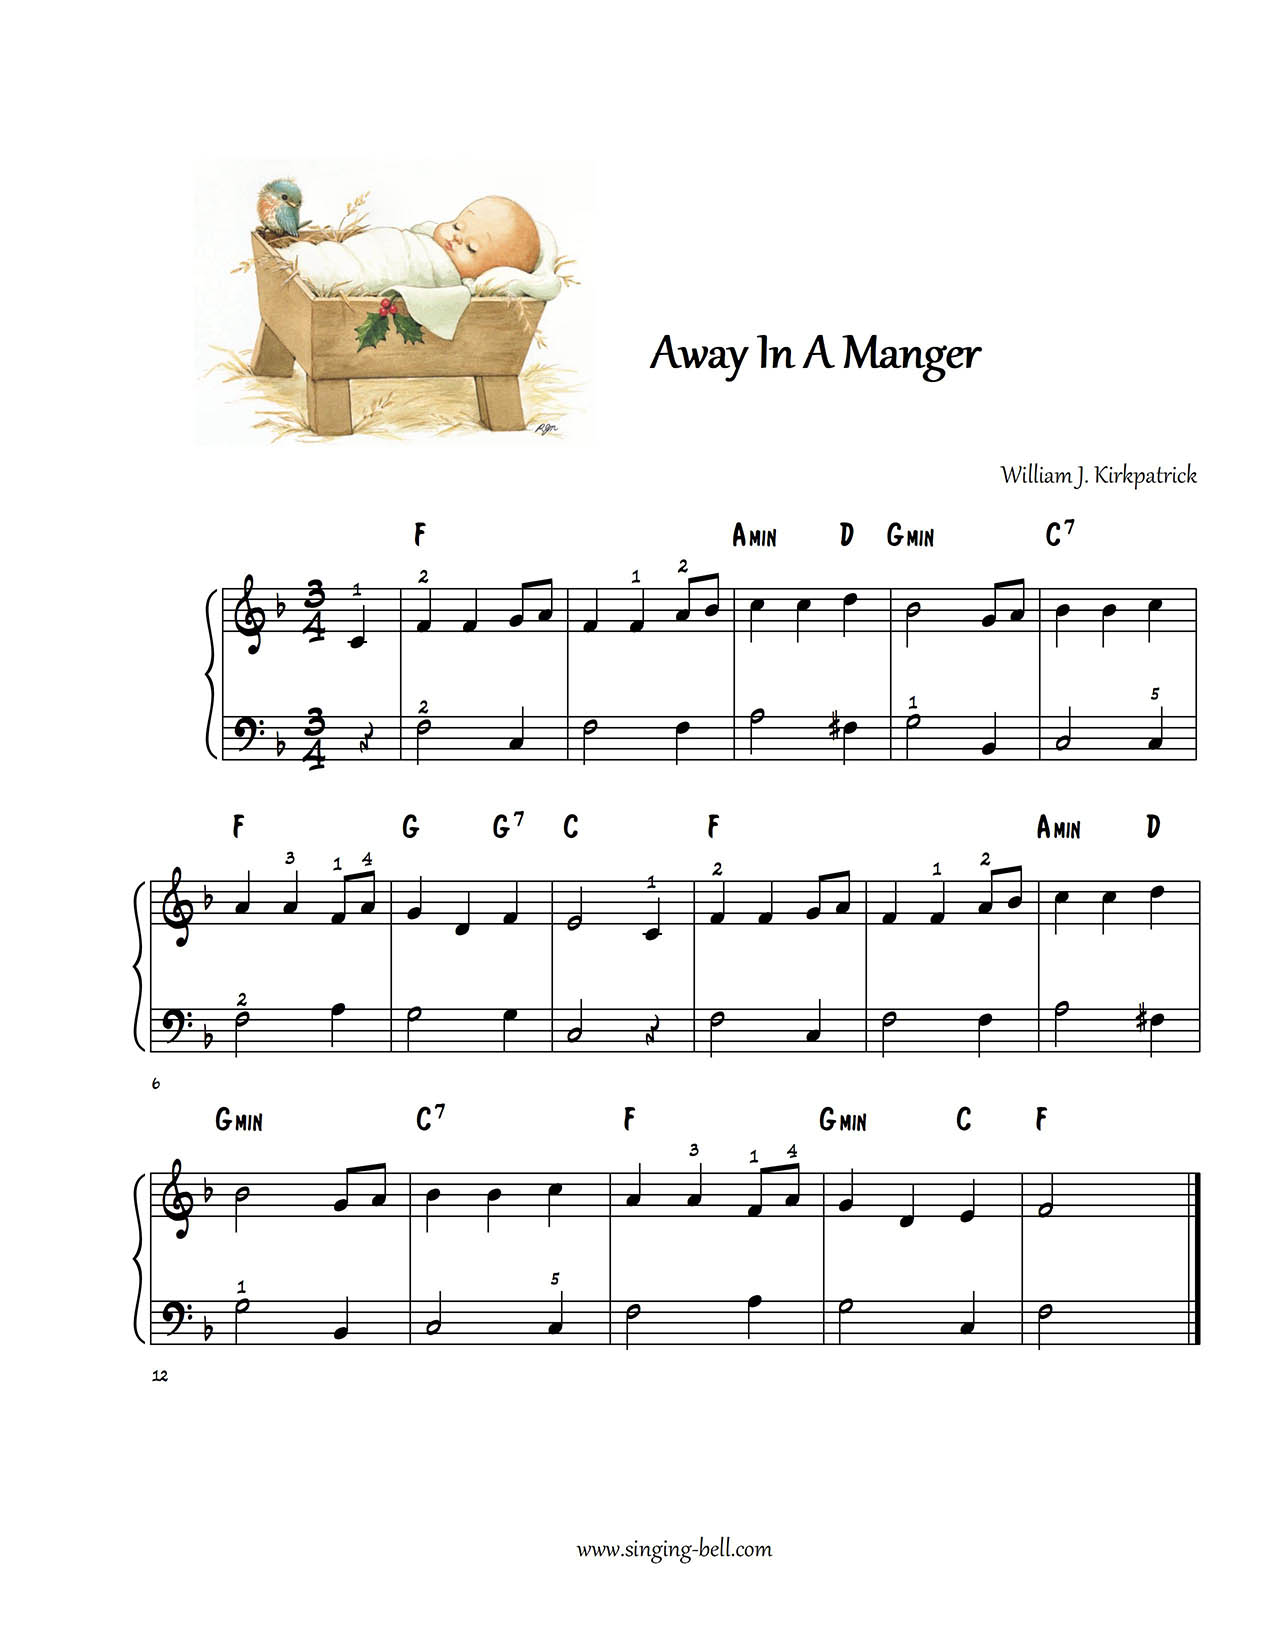 Away in a manger Kirkpatrick easy piano sheet music notes beginners